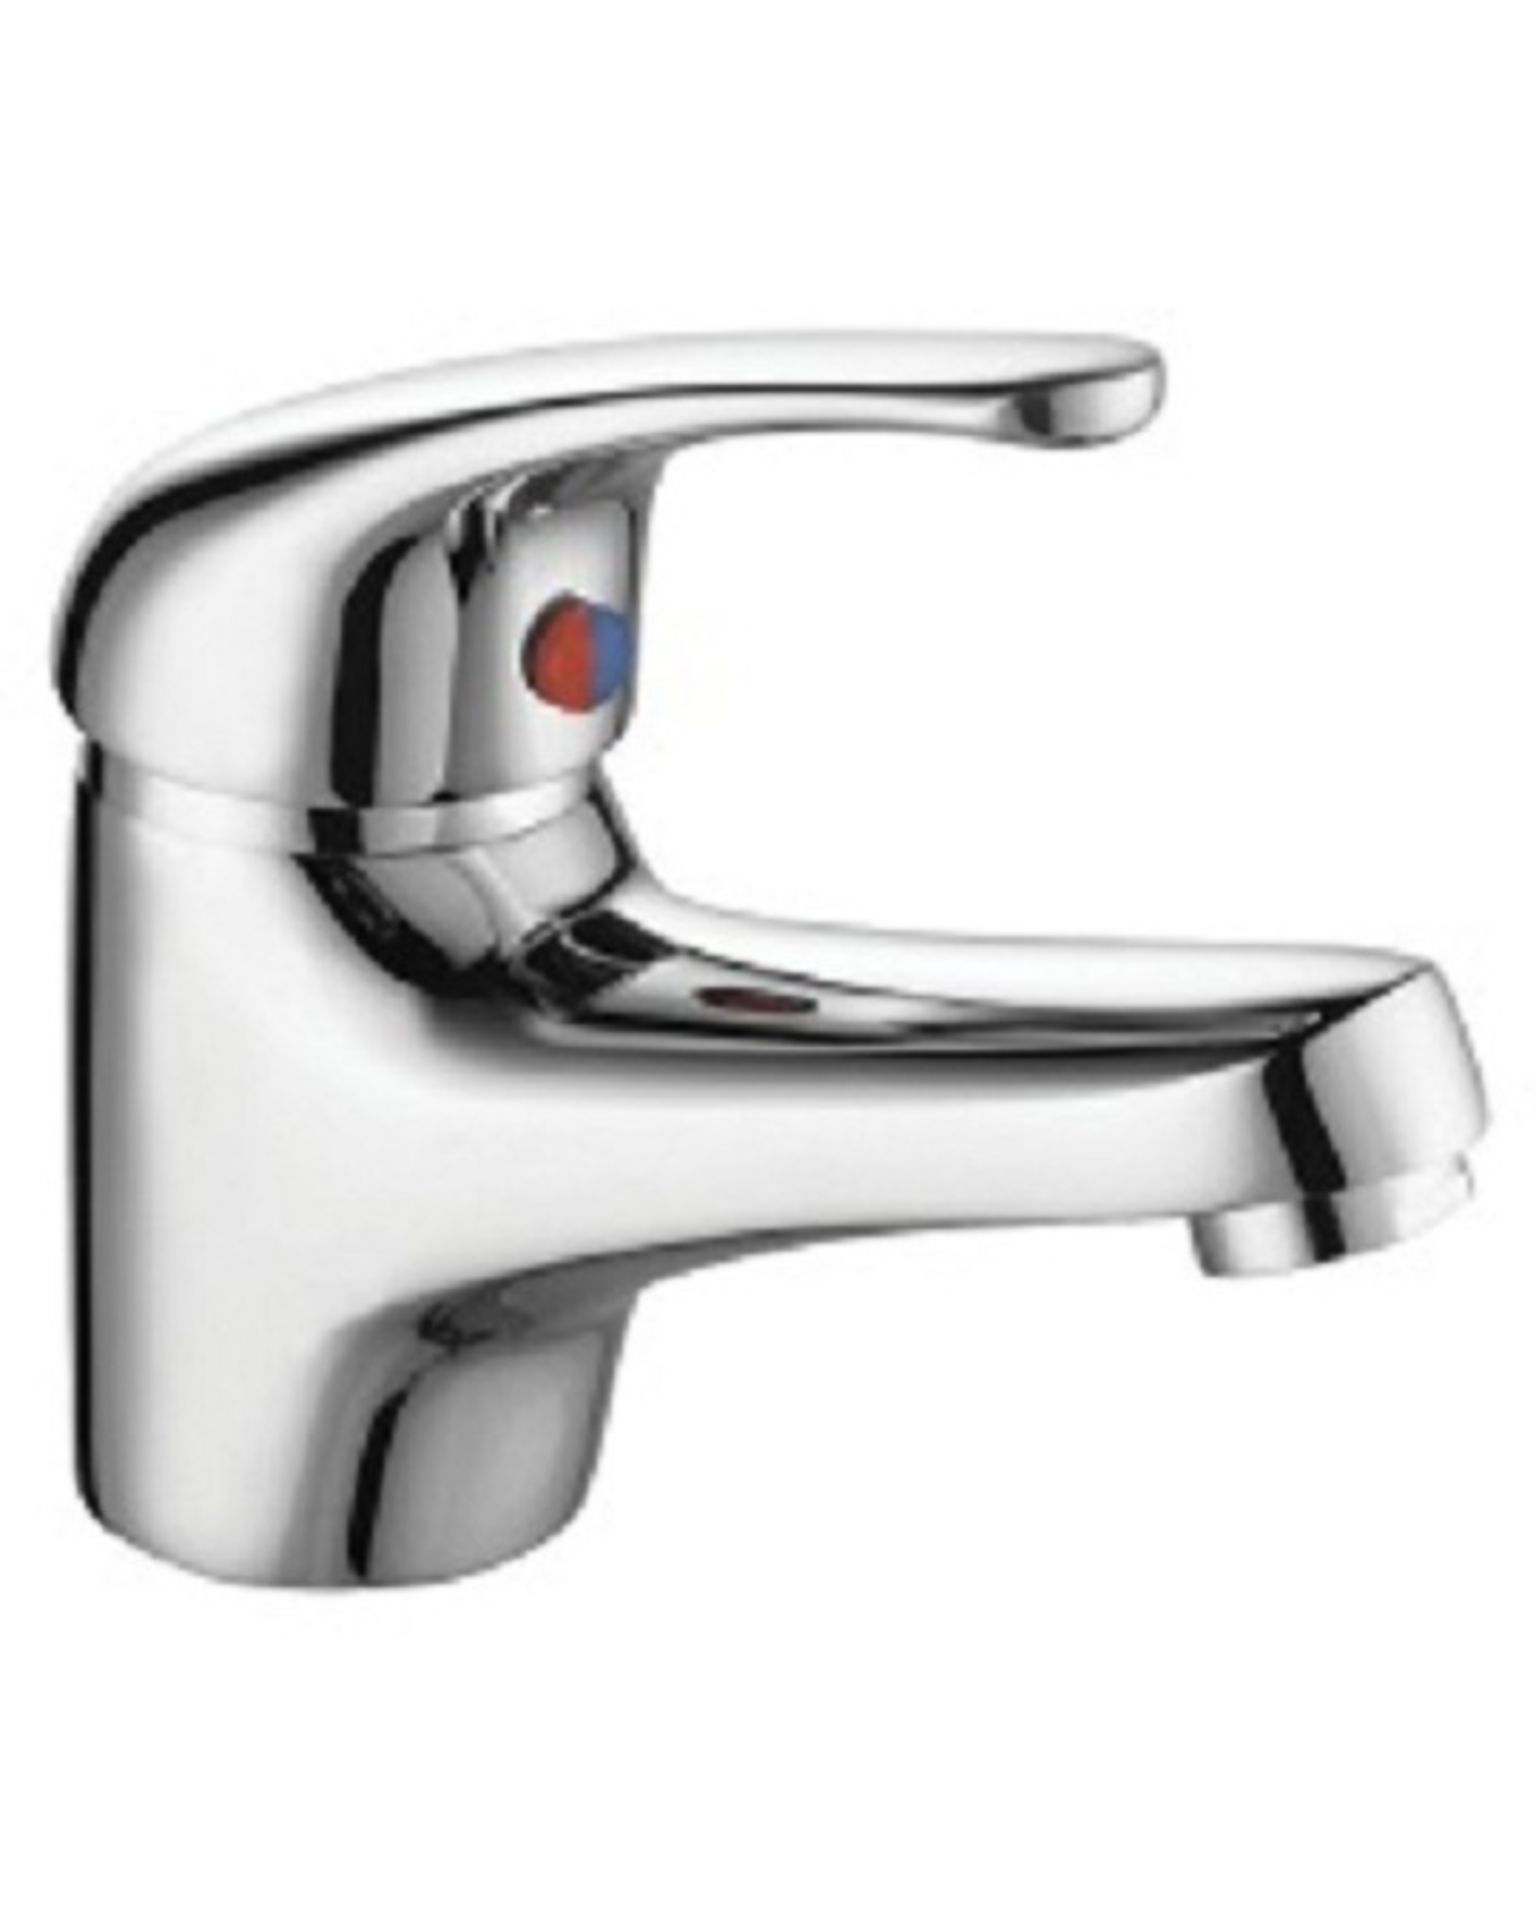 Chrome mixer tap with slotted waste - Image 2 of 2